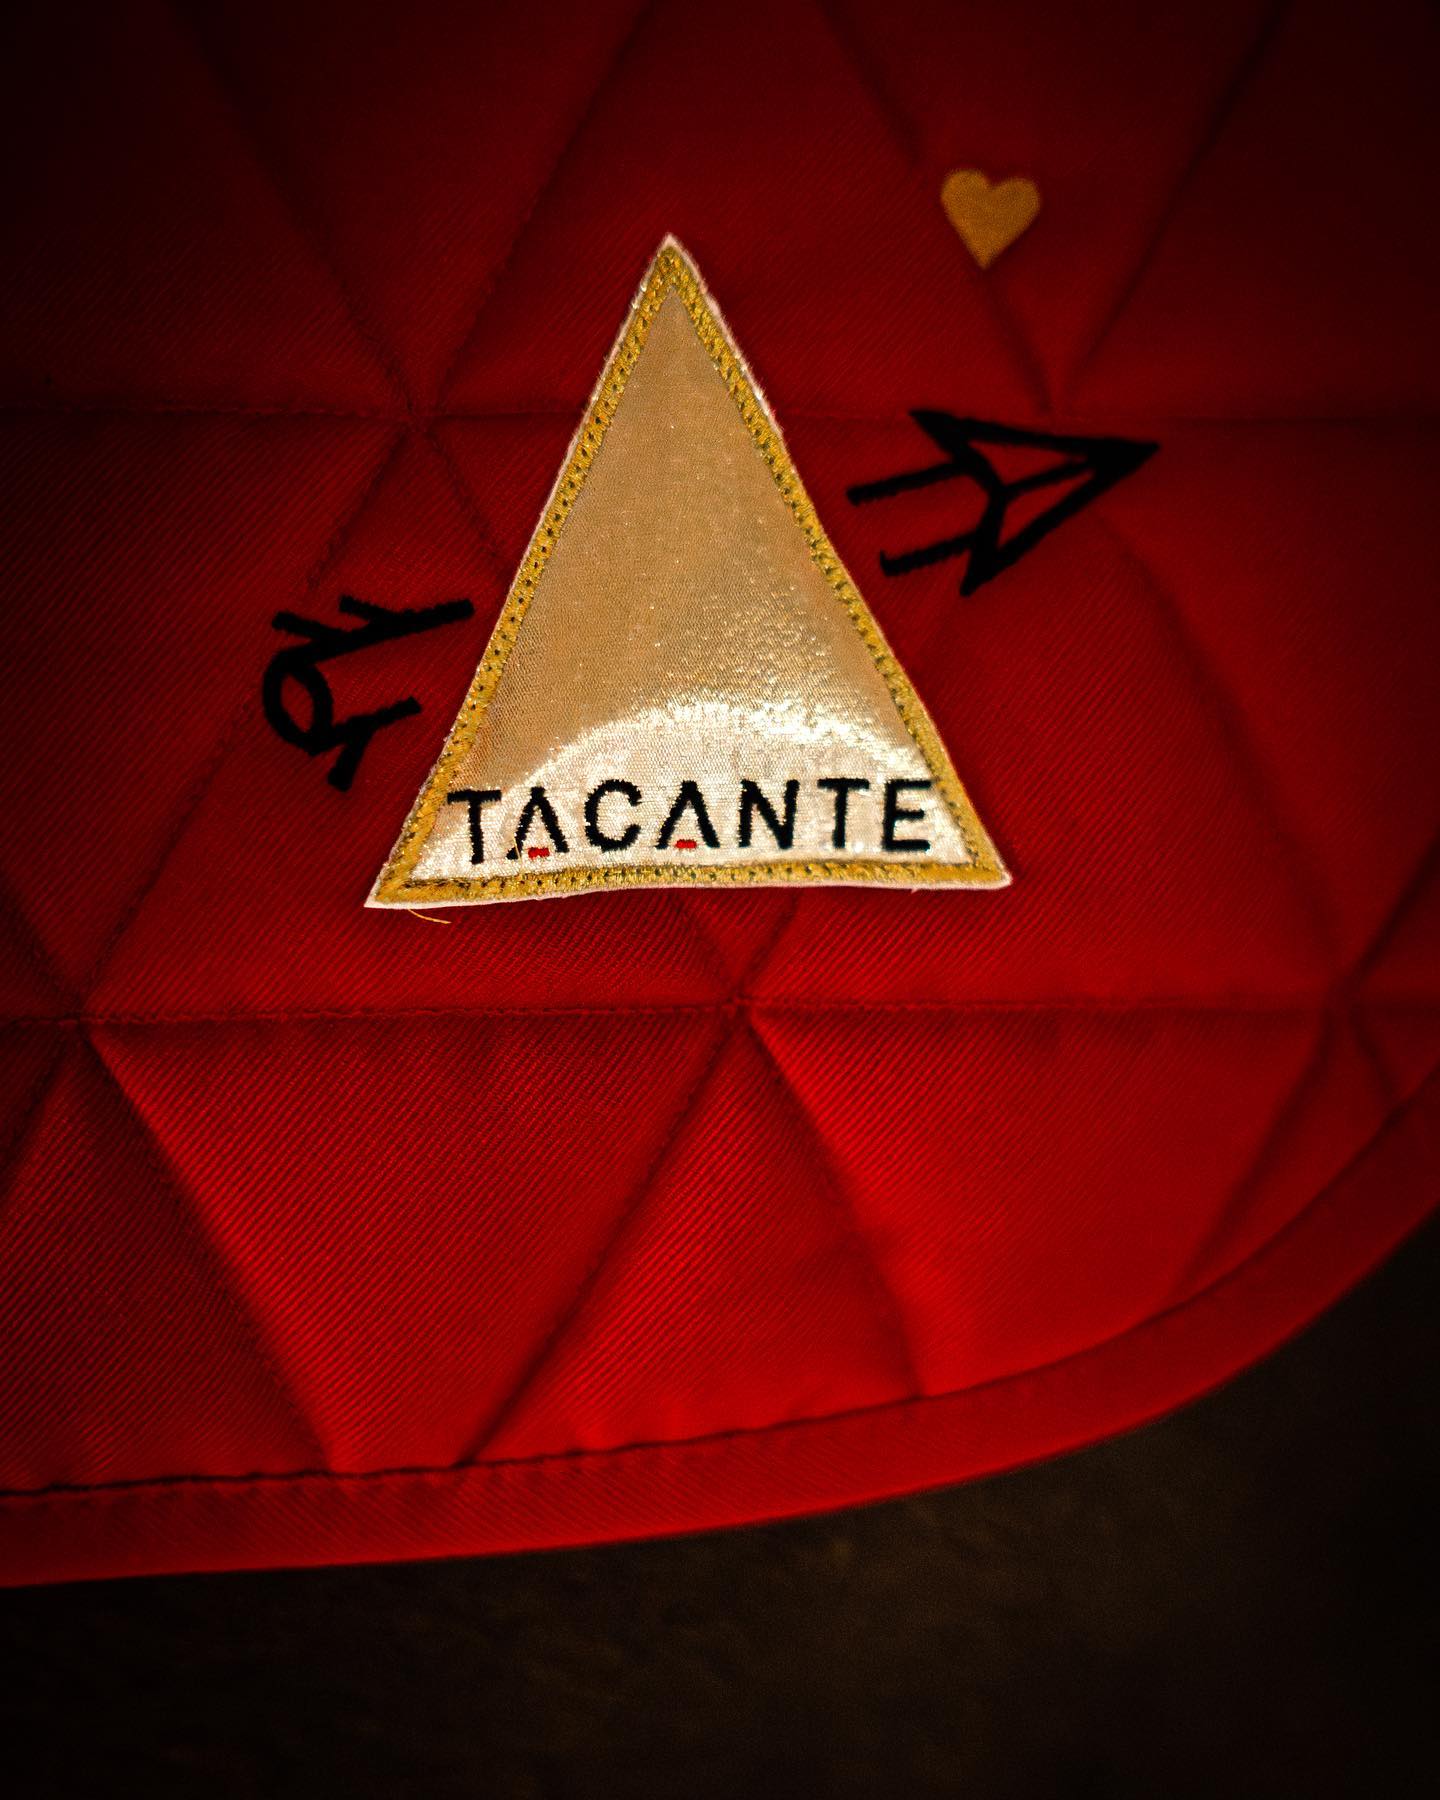 ROCK’N LOVE 2024 🎸💛❤️‍🔥
📸 @hpalprod 
//
#tacante #rocknlove #serielimitee #madeinfrance #broderie #equestrian #equestrianstyle #equestrainlife #sustainable #tapisdeselle #chabraque #numnah #saddlepad